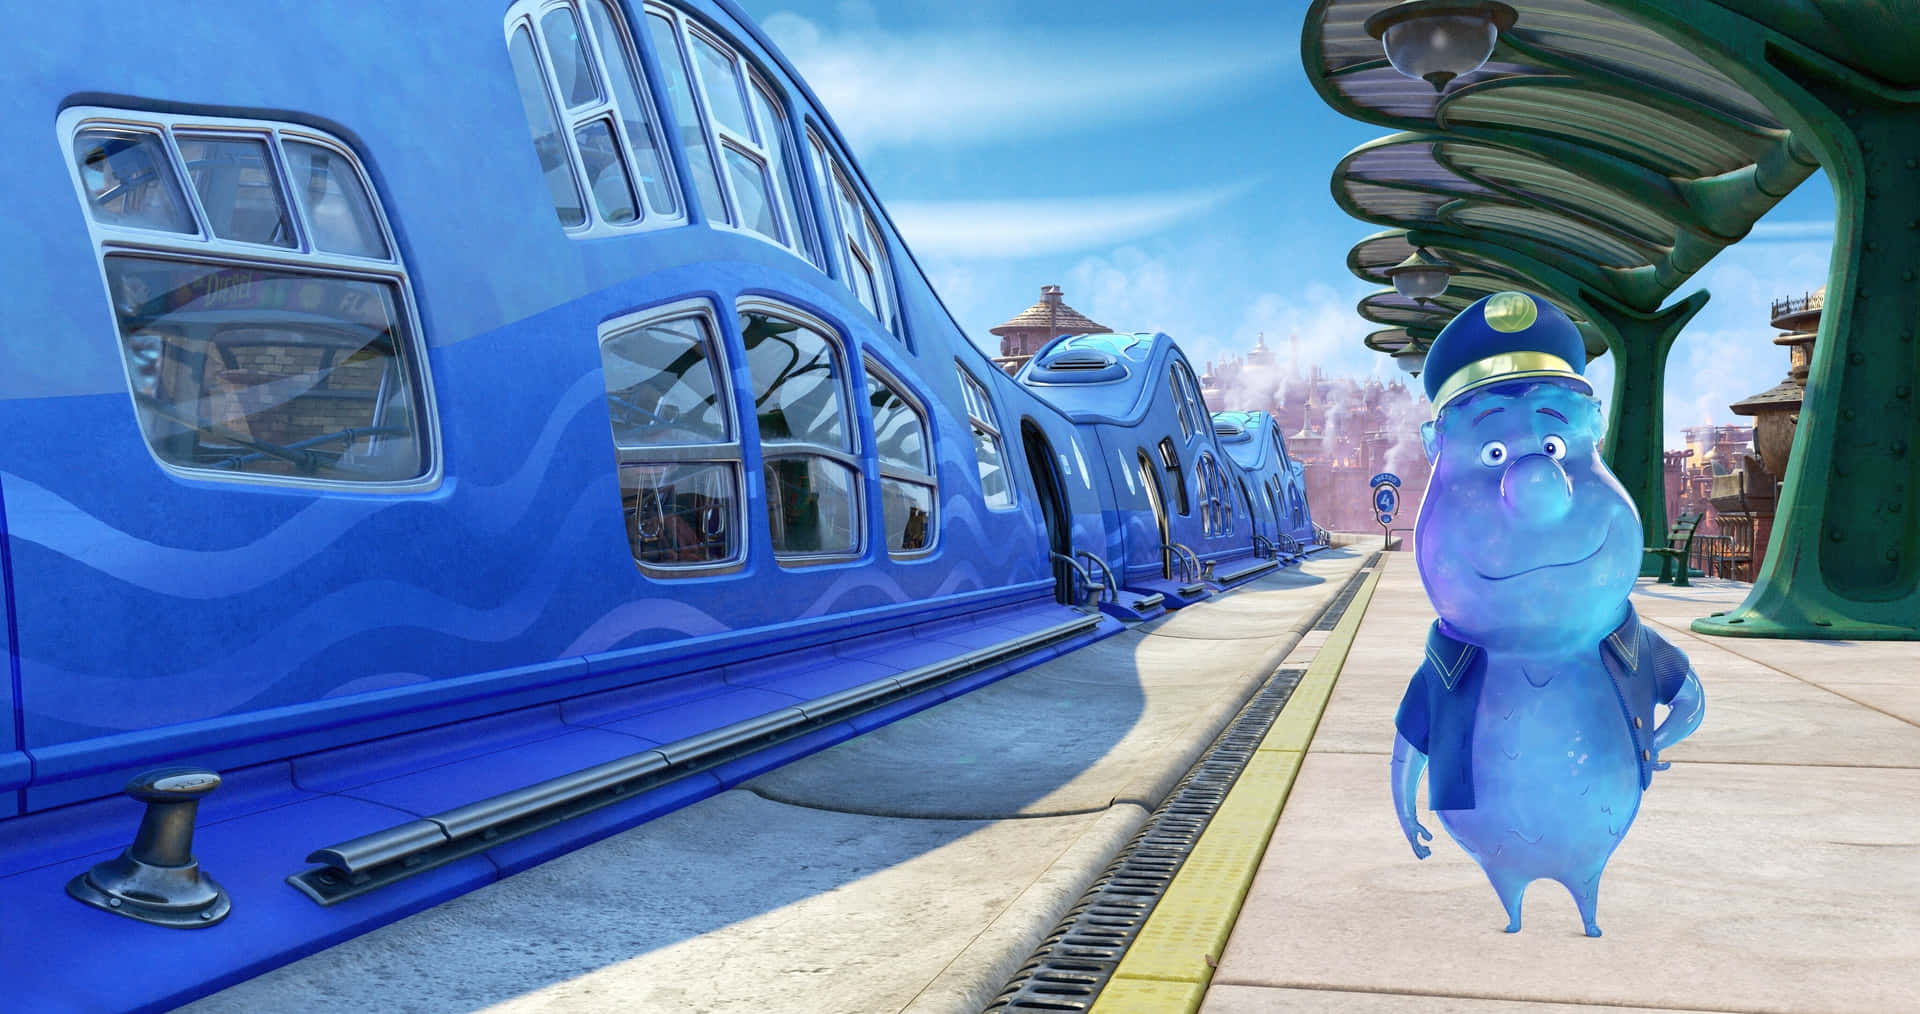 Animated Train Stationwith Character Wallpaper